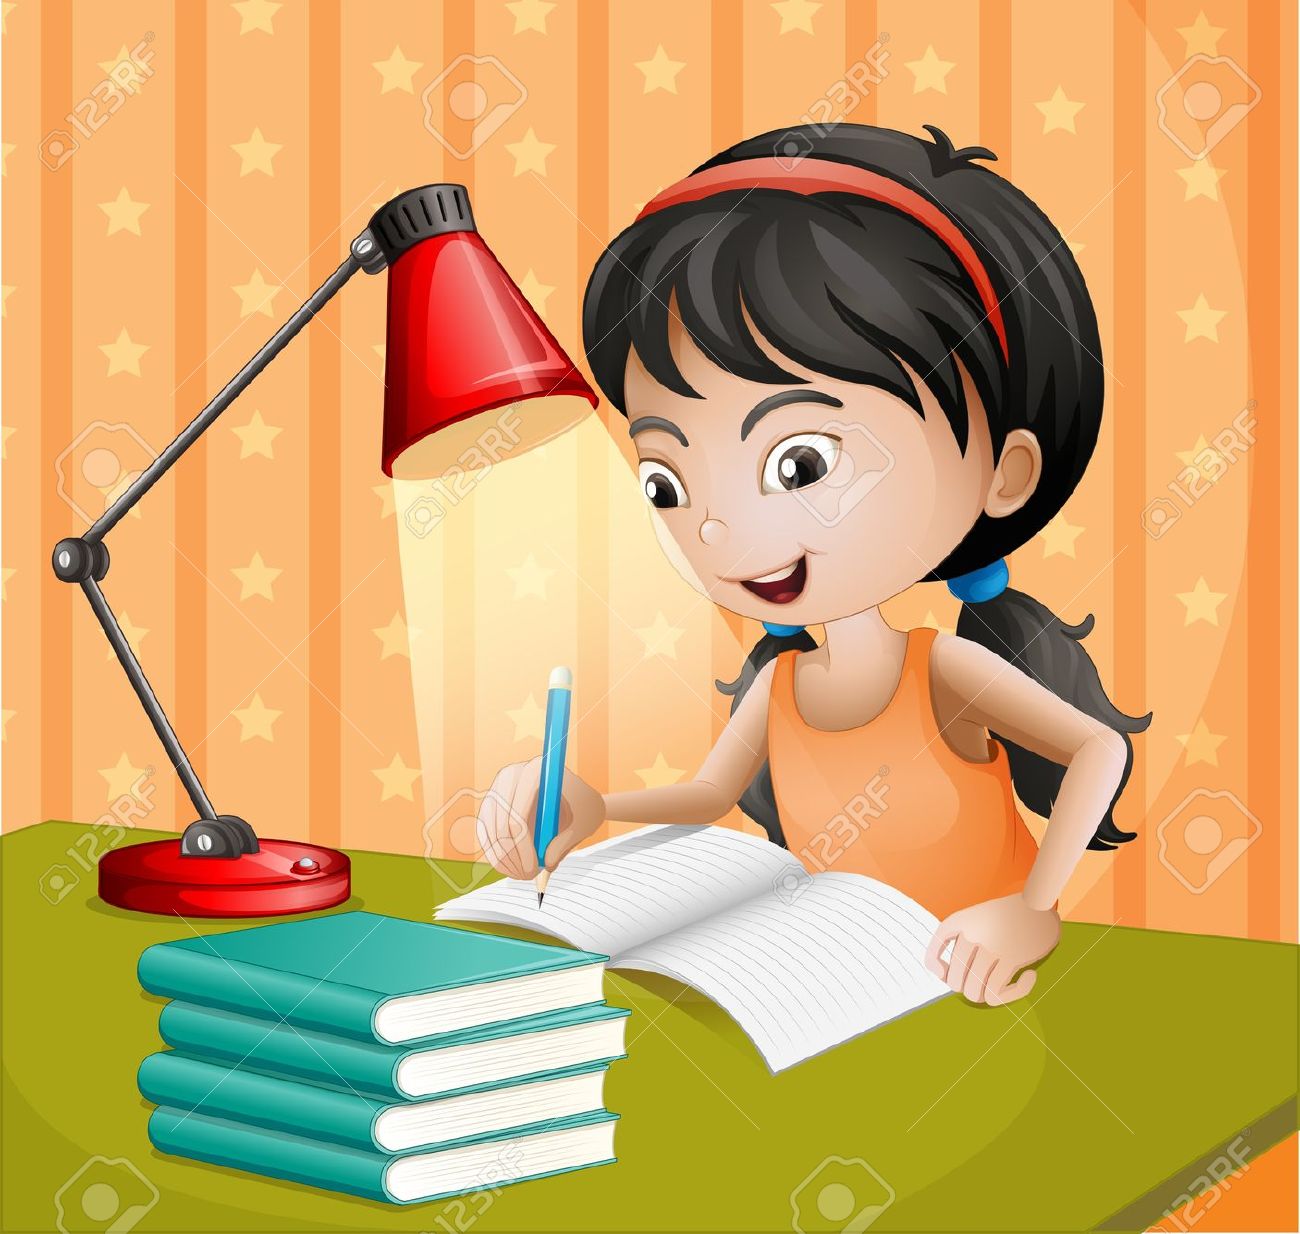 Woman writing a book clipart 